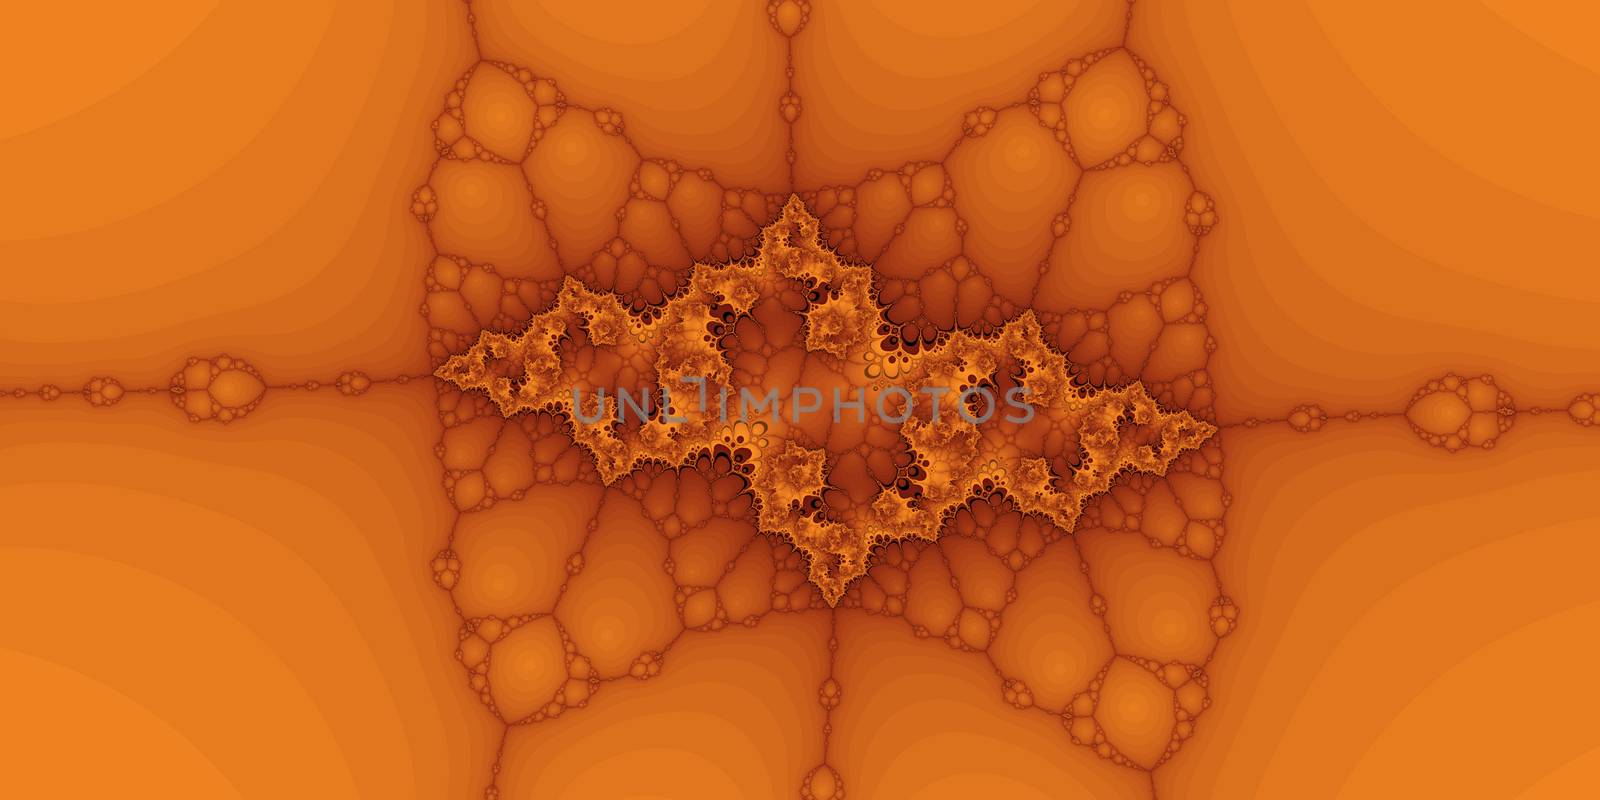 An abstract fractal design representing a interweaving chain in golden colors.